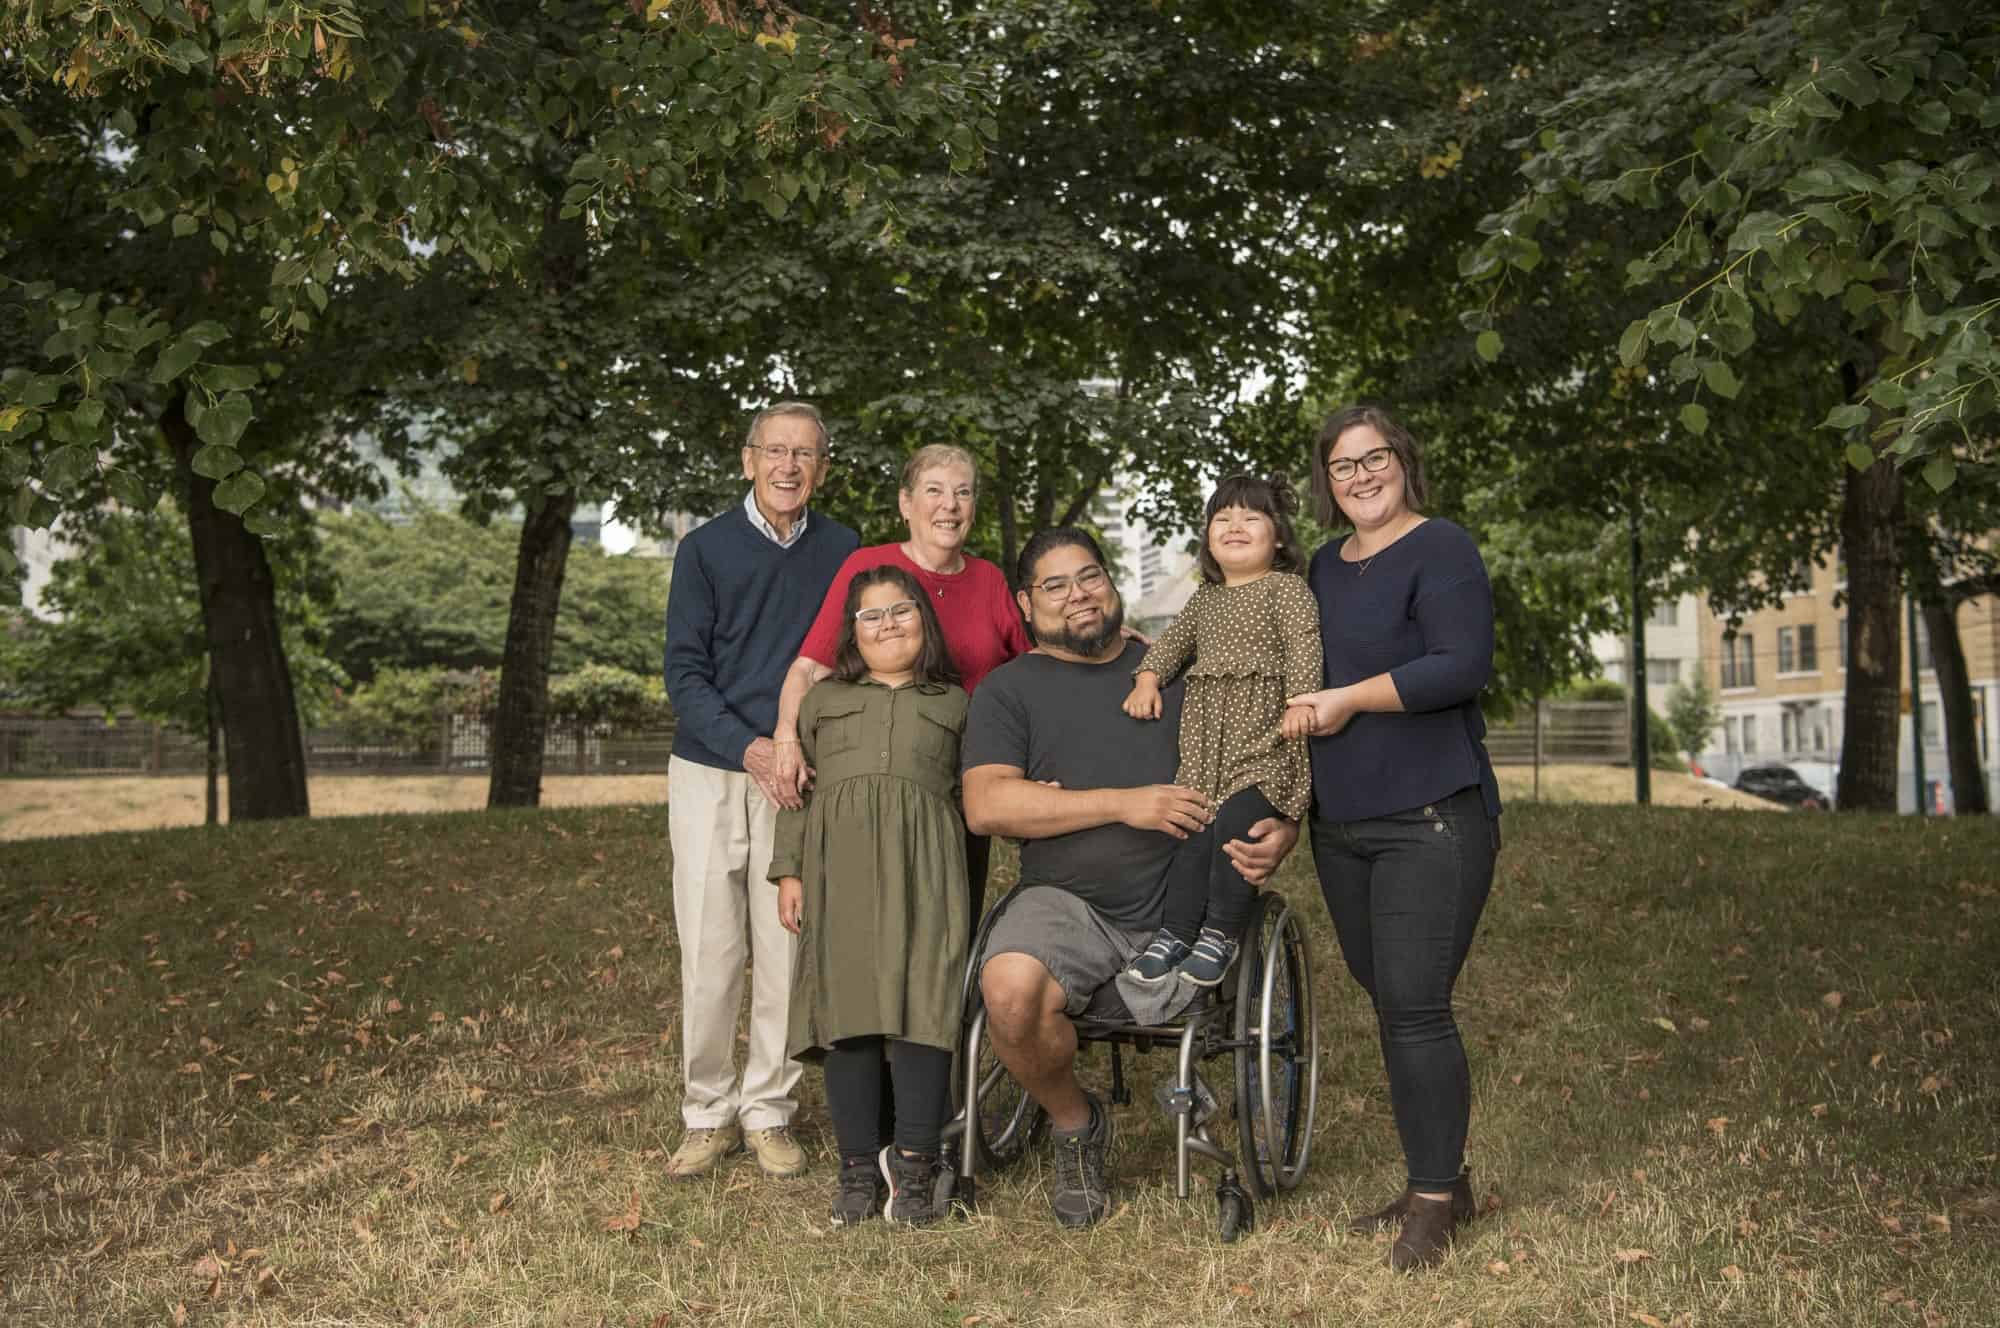 A man that survived a flesh-eating disease, which caused amputation, and a six month stay at St. Paul’s Hospital, seen with his family.